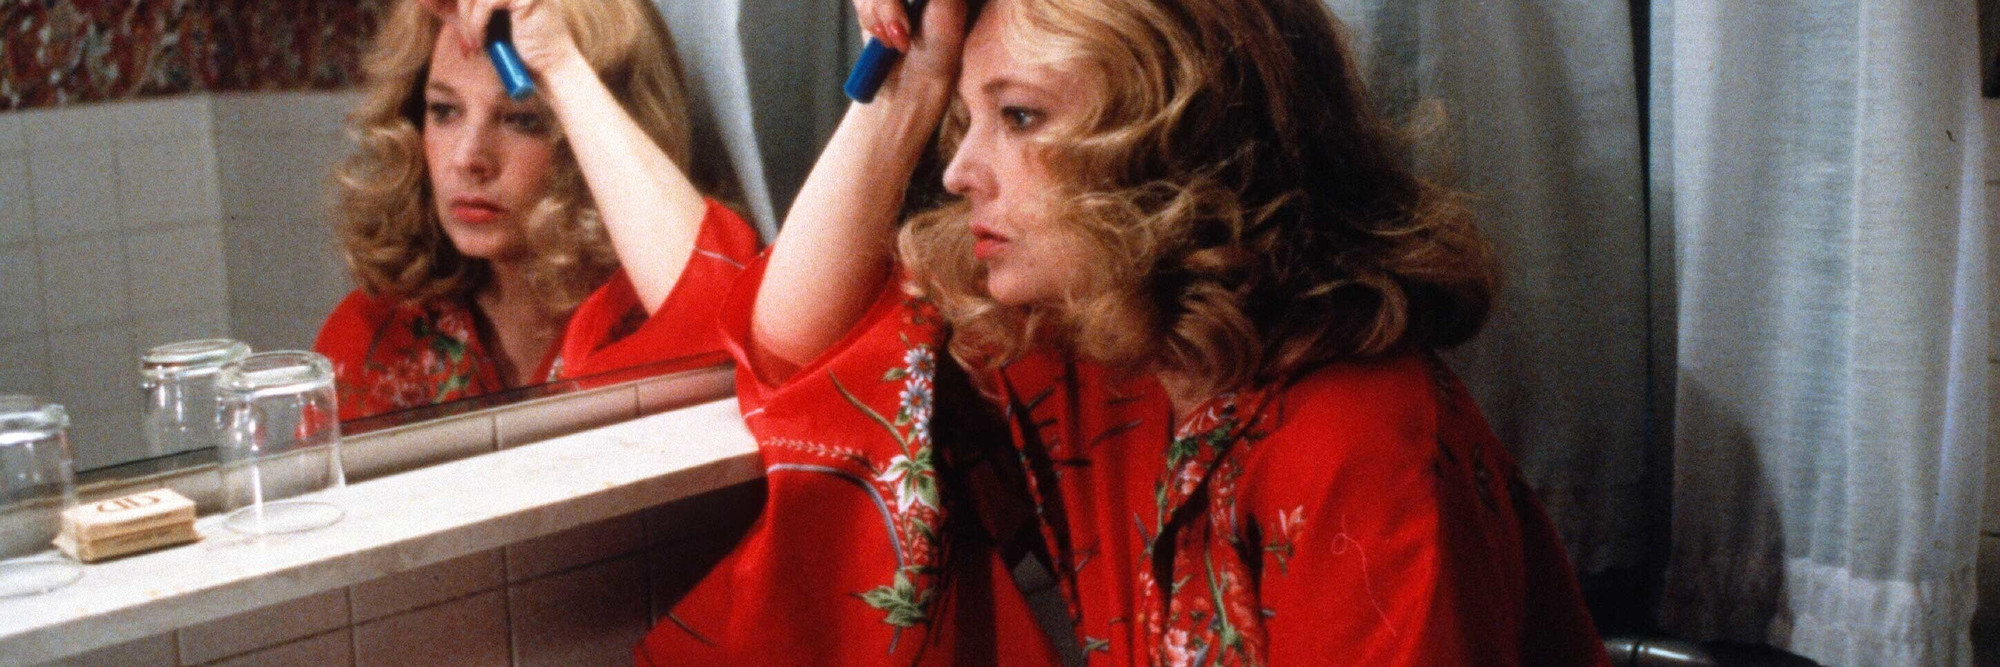 Gloria. 1980. USA. Written and directed by John Cassavetes. Courtesy of Columbia Pictures/Photofest. © Columbia Pictures